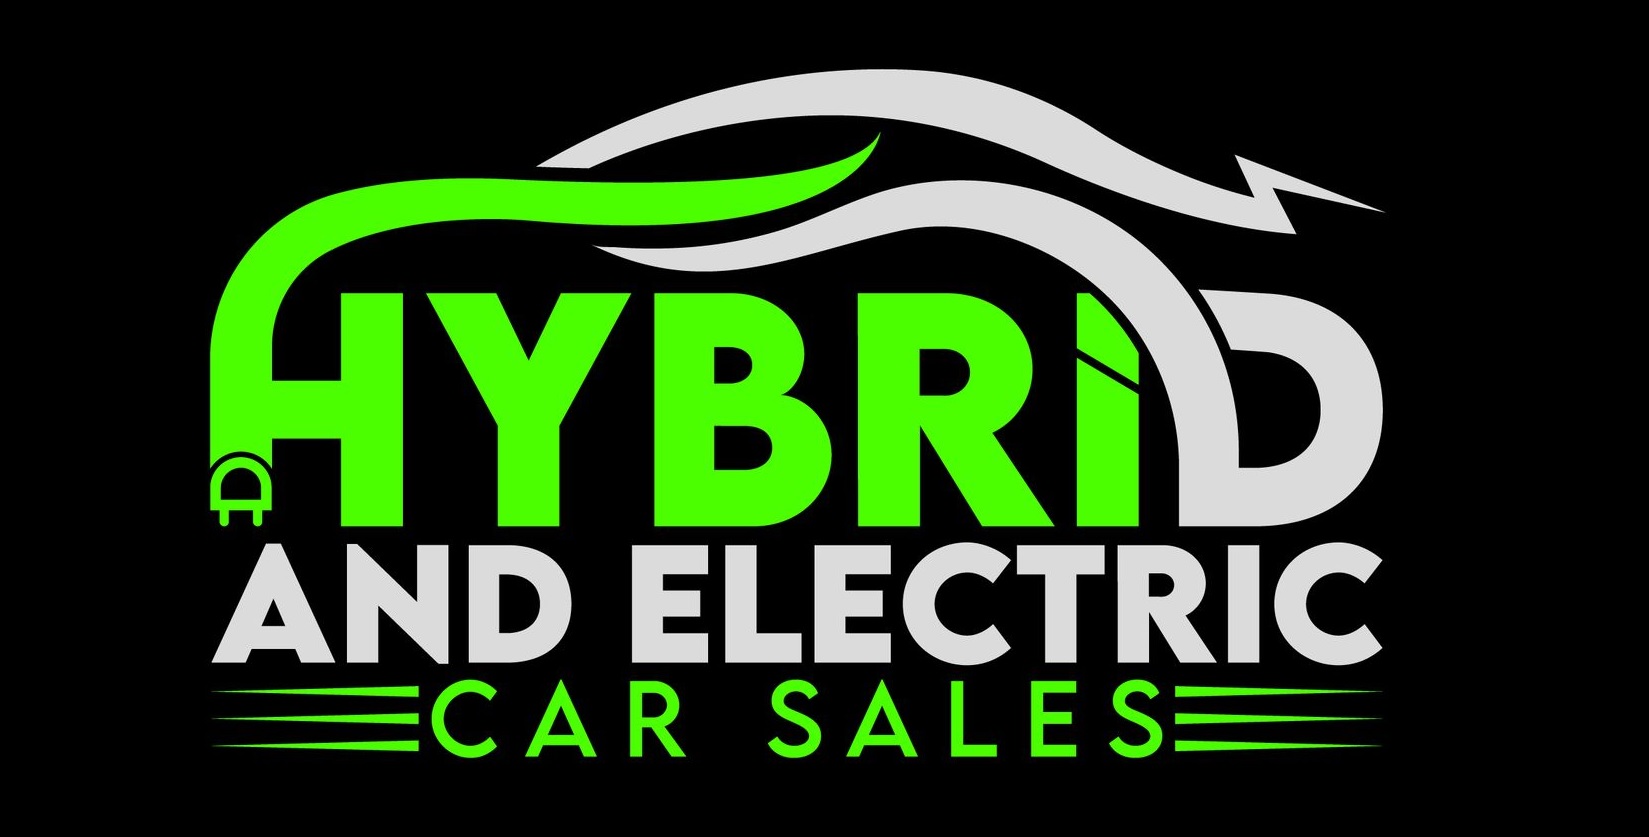 Hybrid and Electric Cars For Sale in Franklin, TN Brentwood, TN Cool Springs, TN Nashville, TN Spring Hill, TN